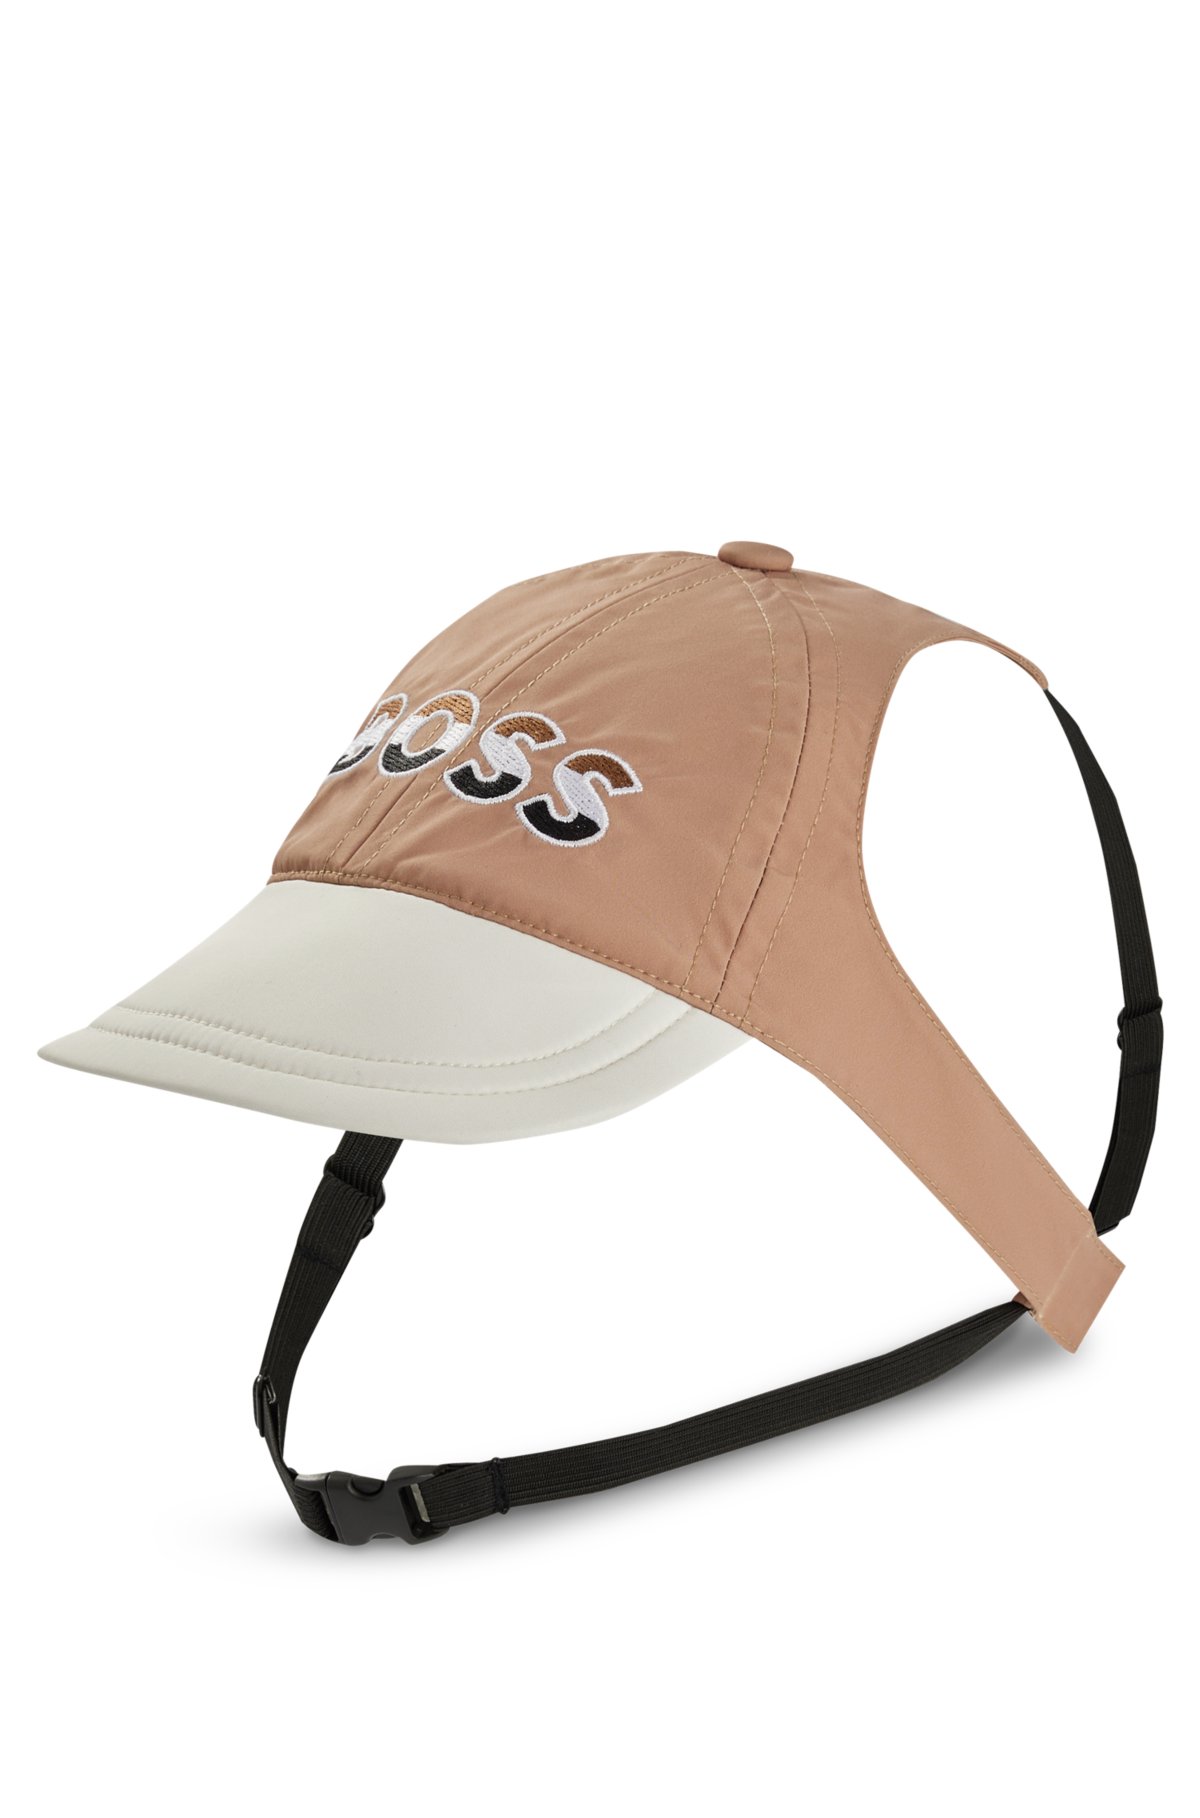 Dog hat with signature details and adjustable band, Beige